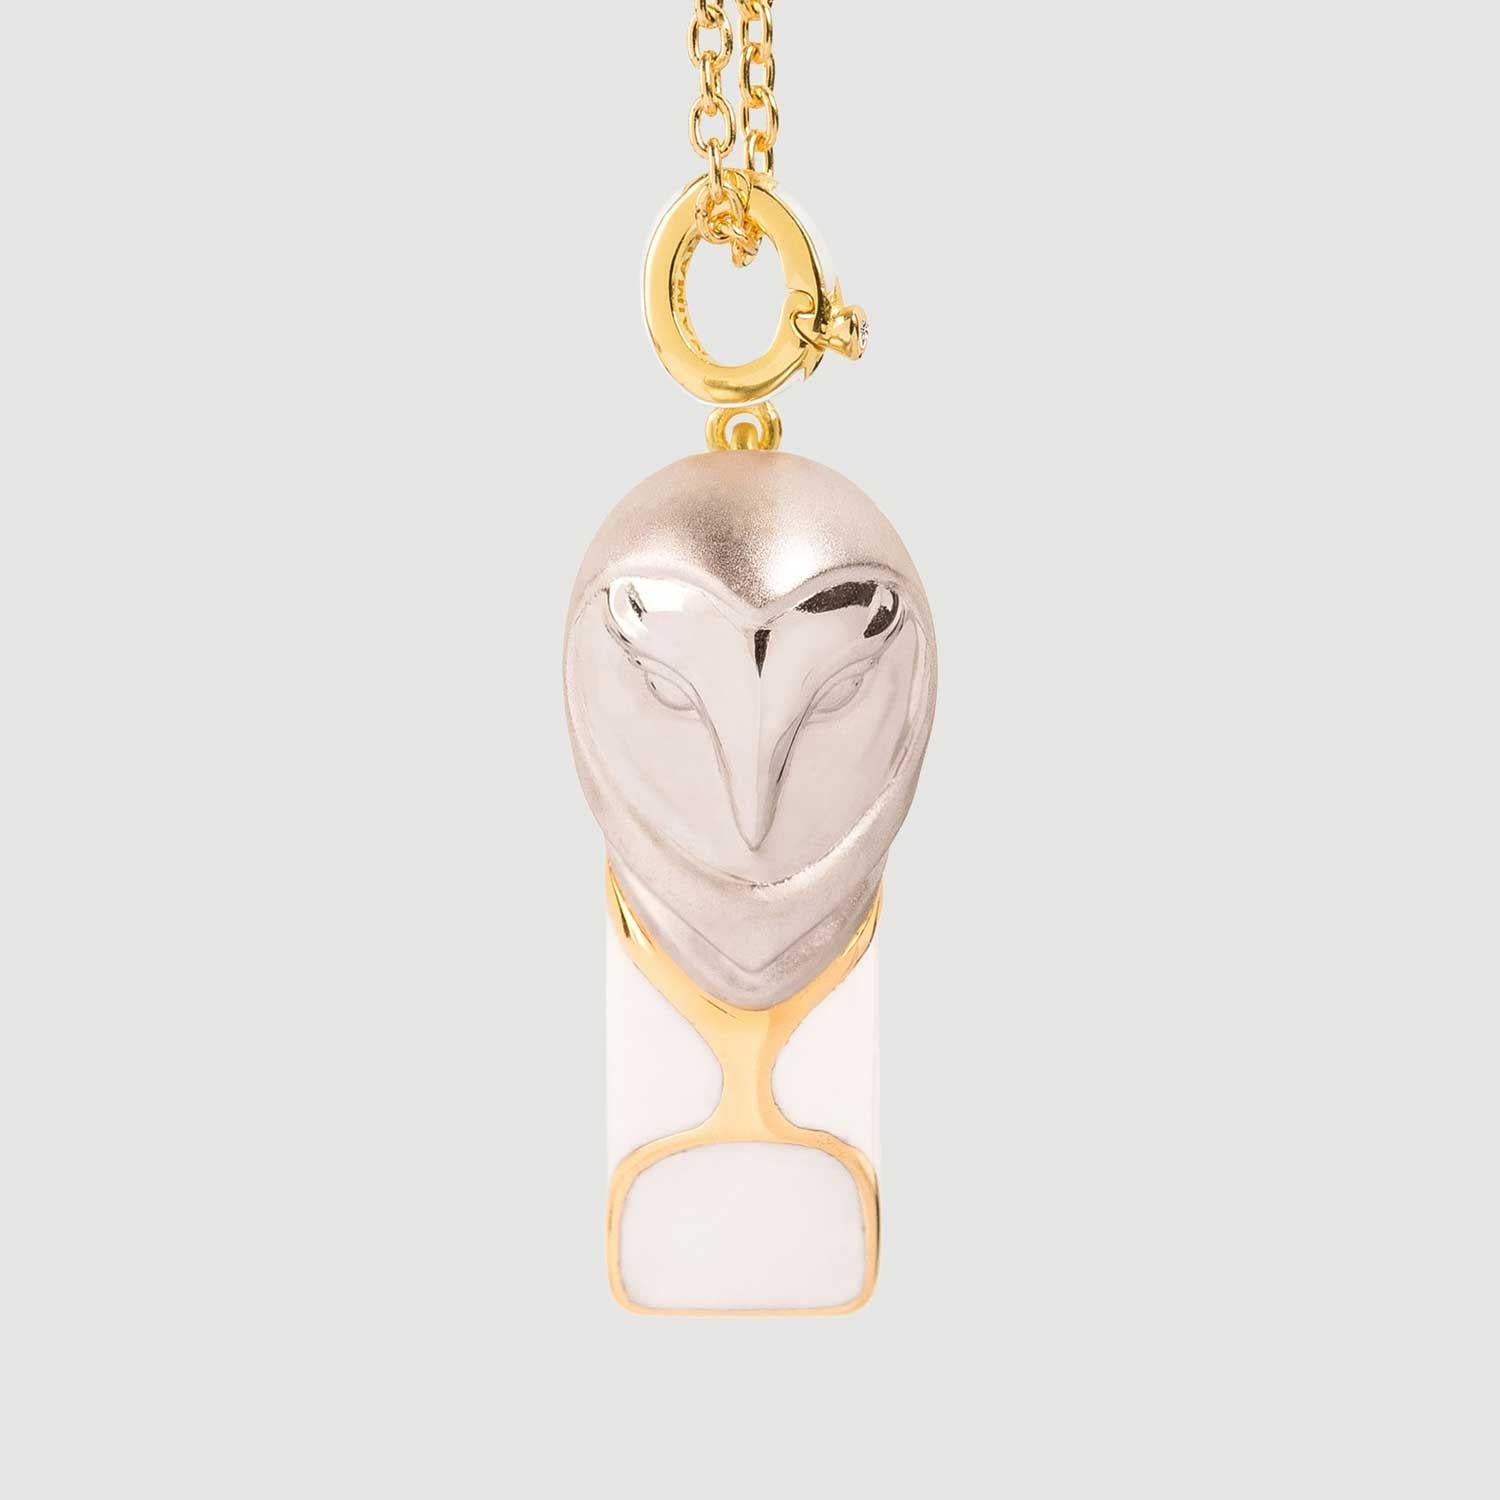 Owl symbolism and meanings include wisdom, intuition, supernatural power, independent thinking.

Owls have had different meanings in various cultures throughout history. 

The Greek Goddess Athena, who was the virgin goddess of wisdom, was always